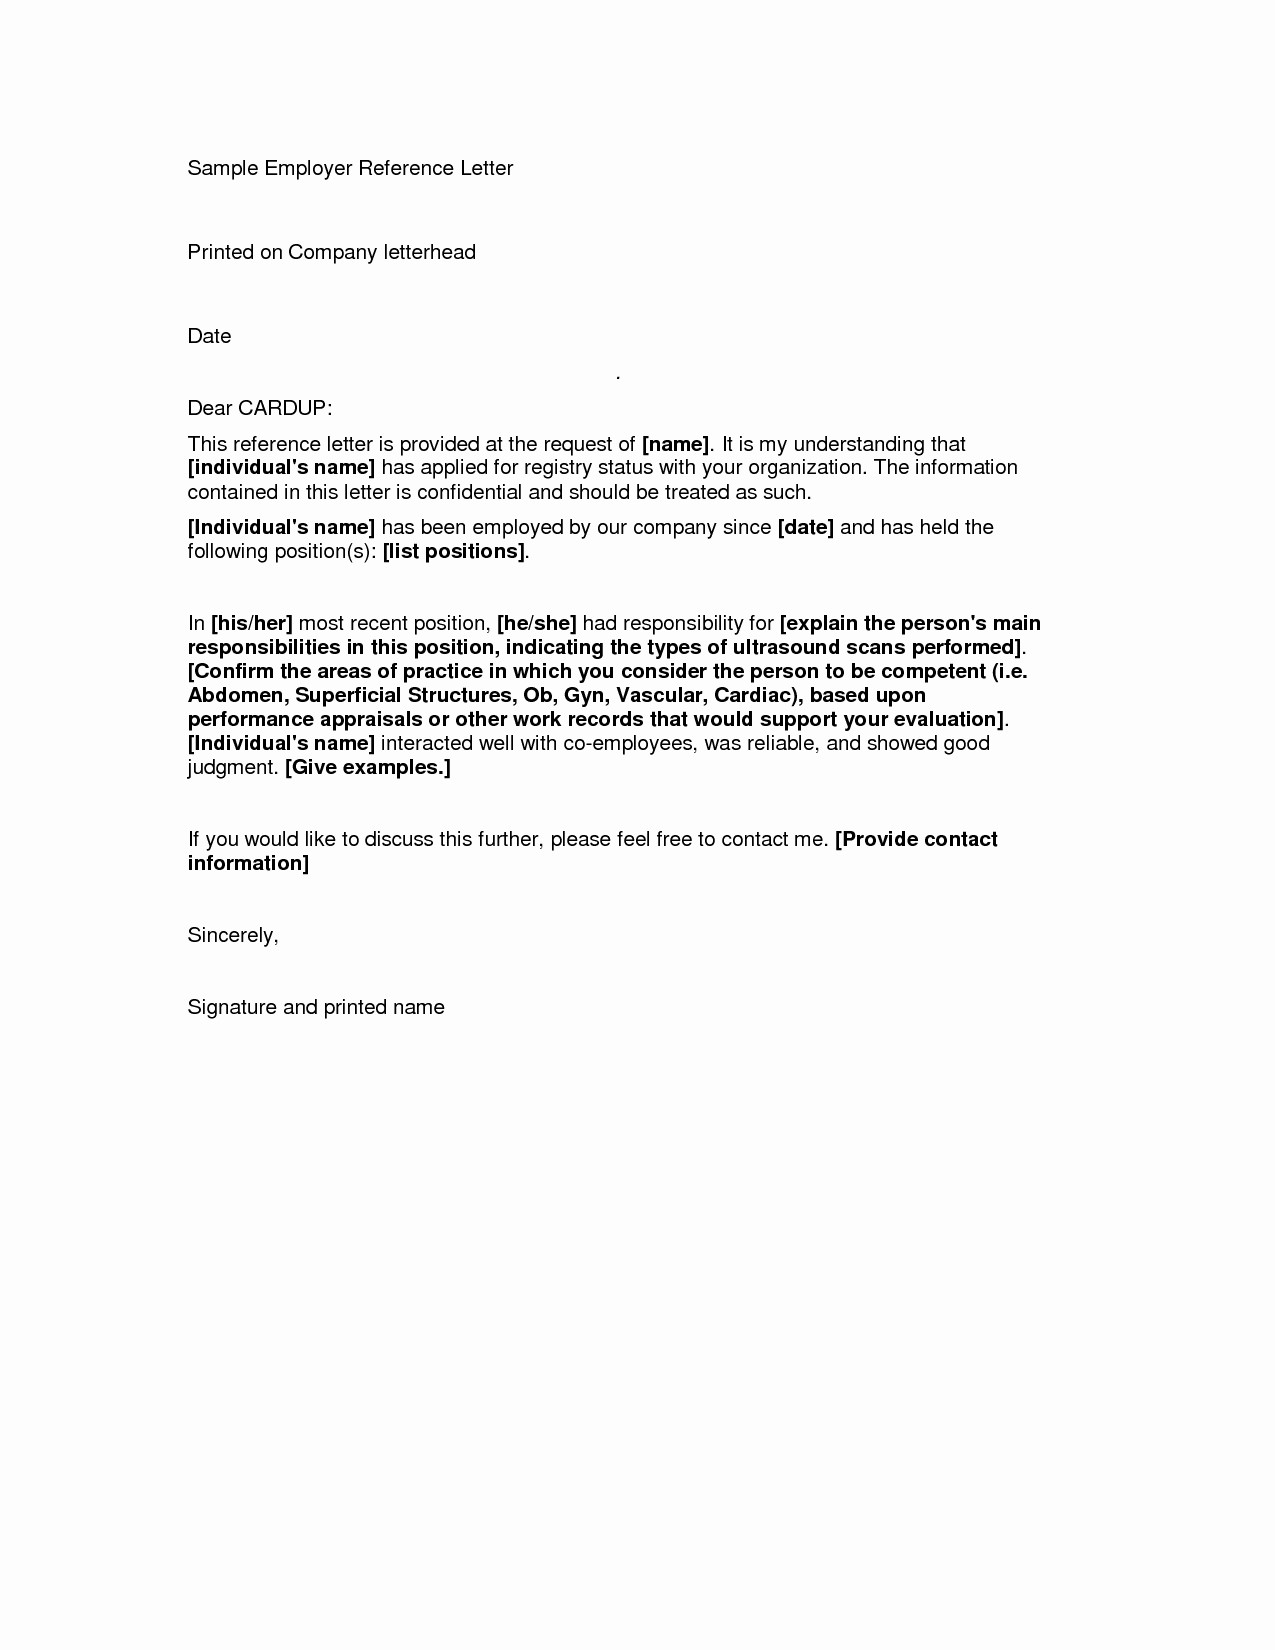 Sample Letters Of Recommendation Employee Beautiful Re Mendation Letter From Supervisor